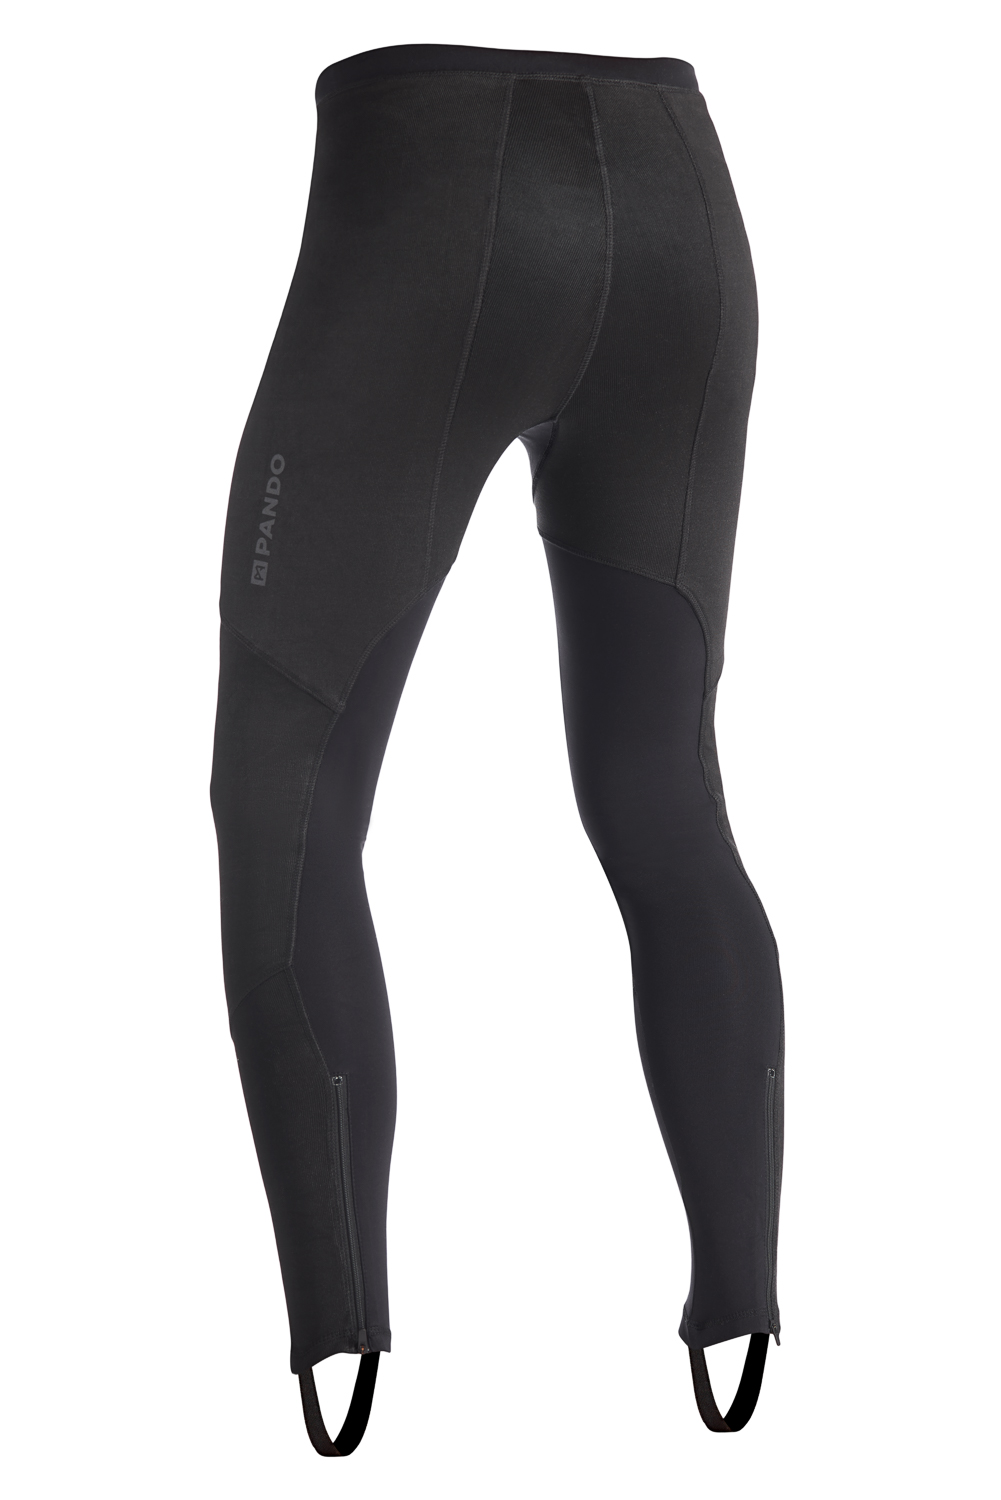 Pando Moto Skin UH1 CE approved Armoured Dyneema Leggings review 